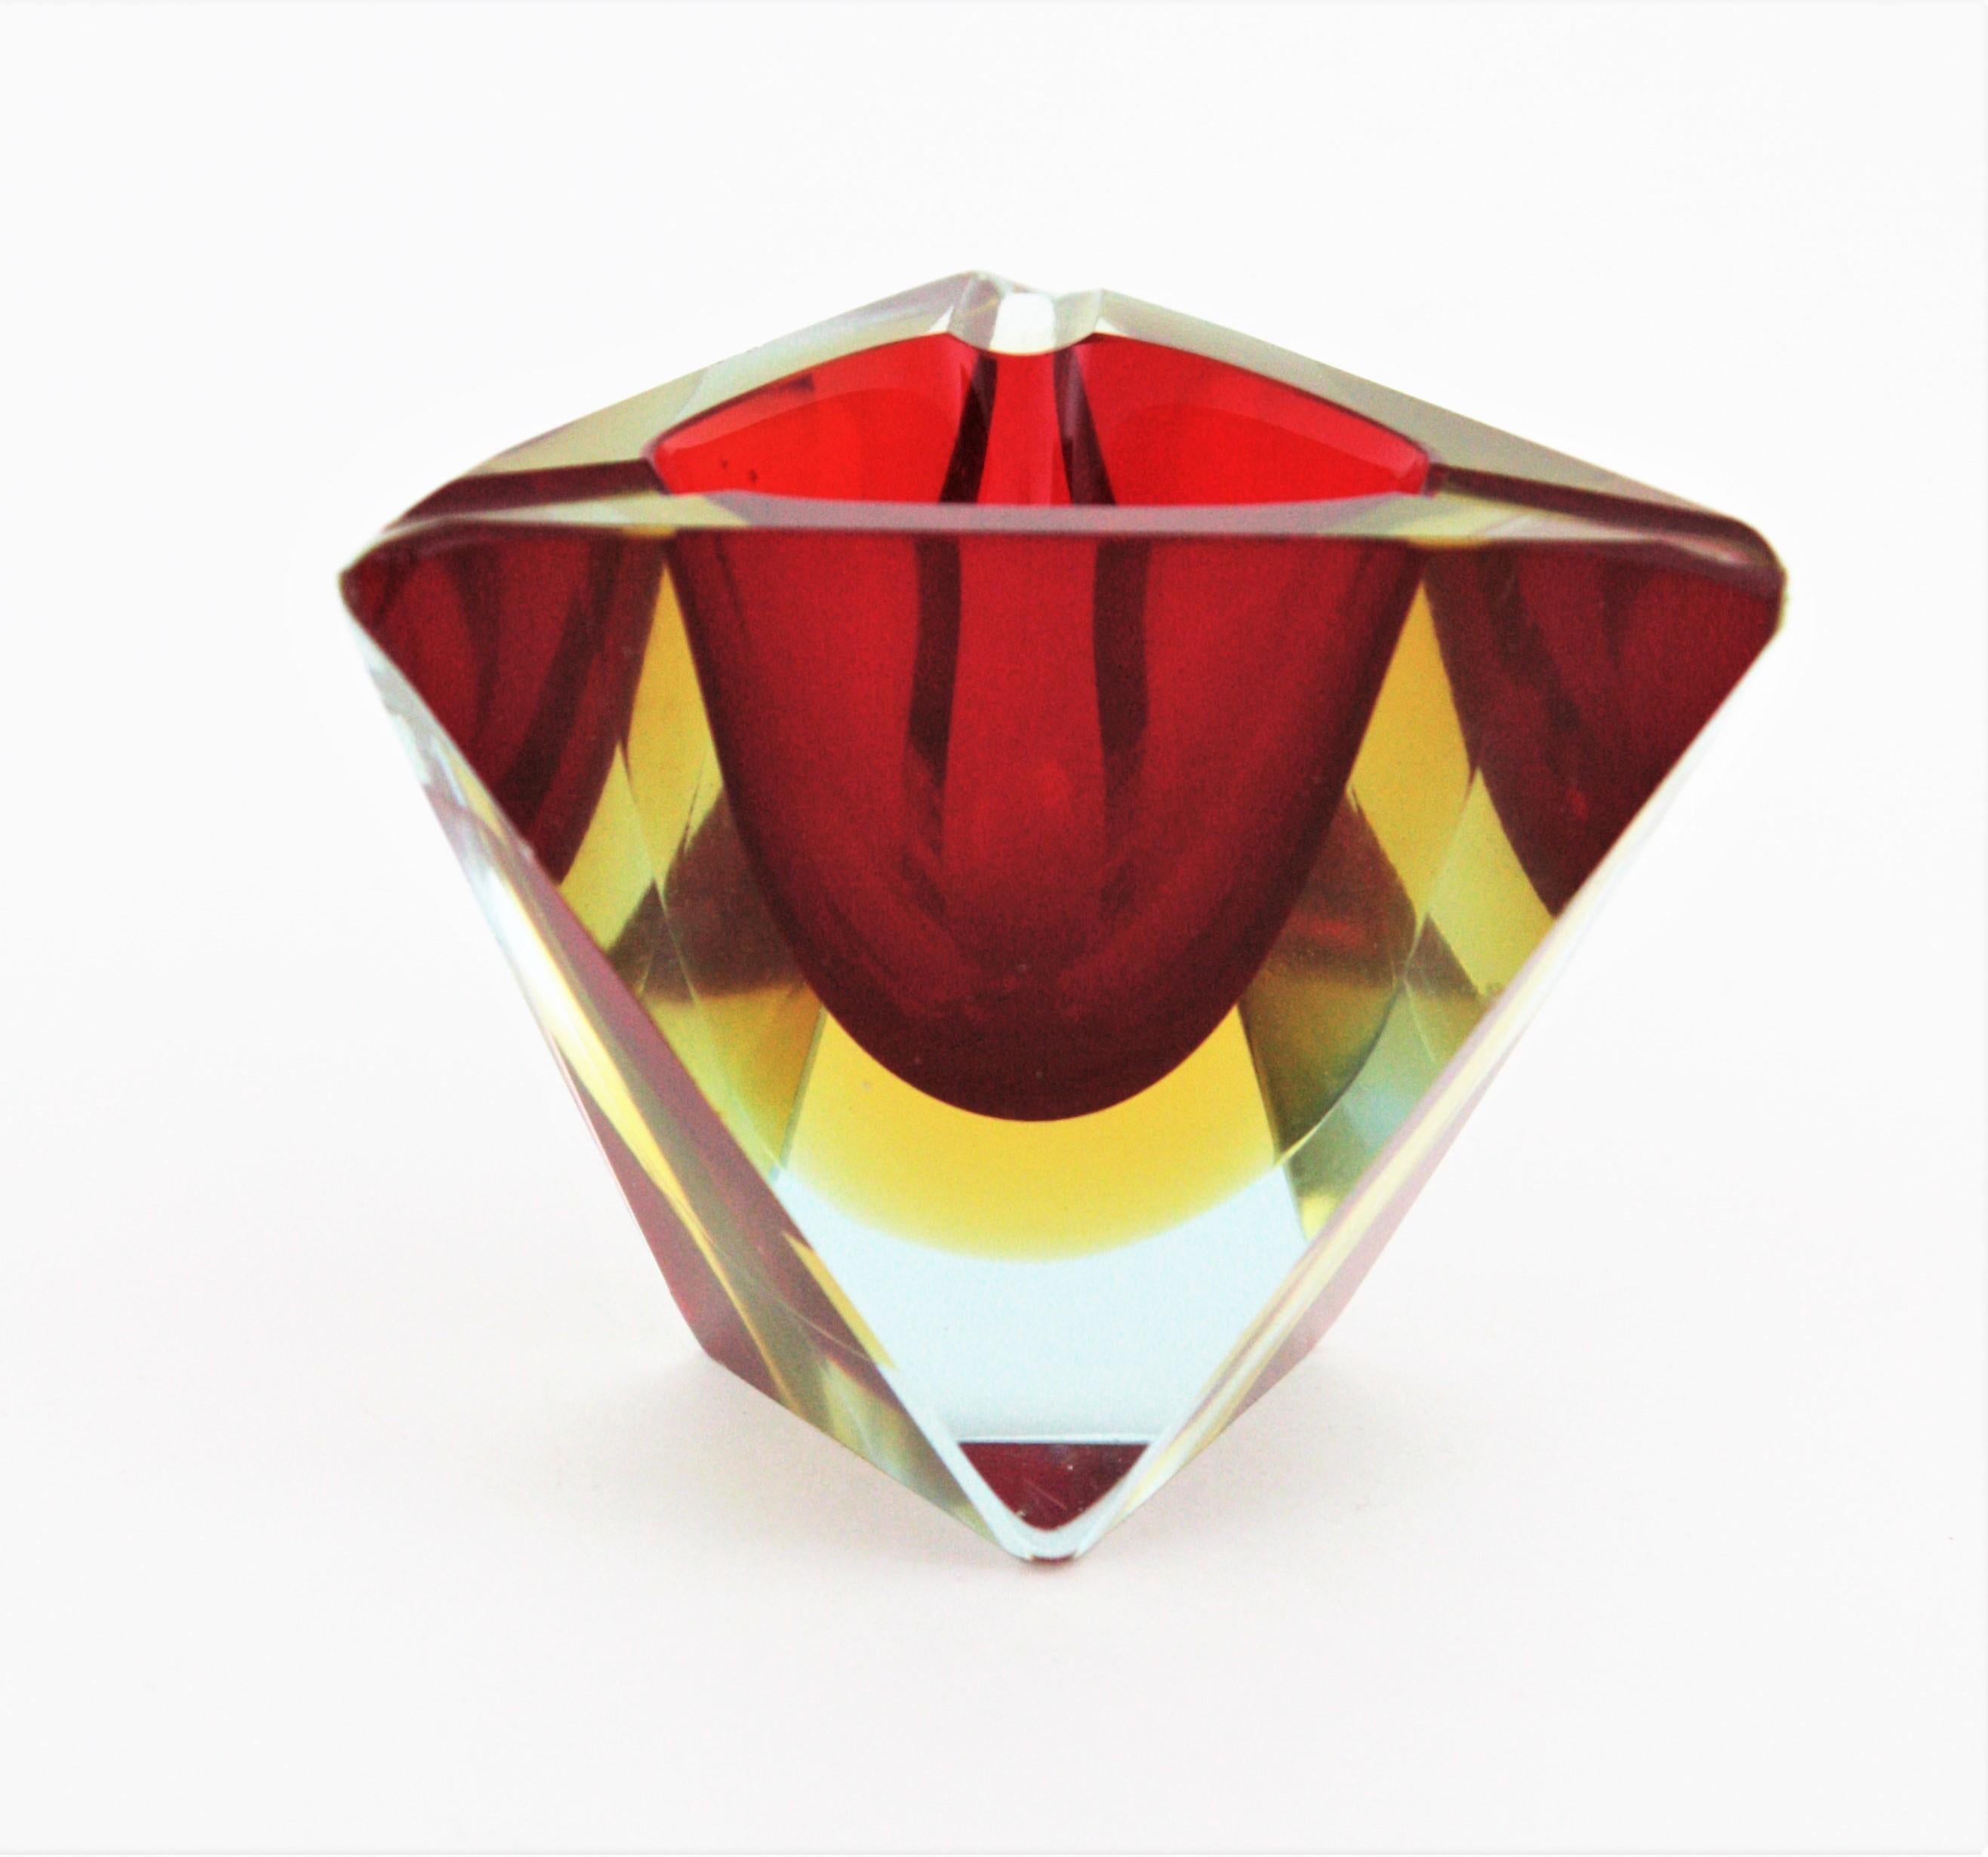 Italian Flavio Poli Murano Sommerso Red Yellow Faceted Triangular Glass Ashtray / Bowl For Sale